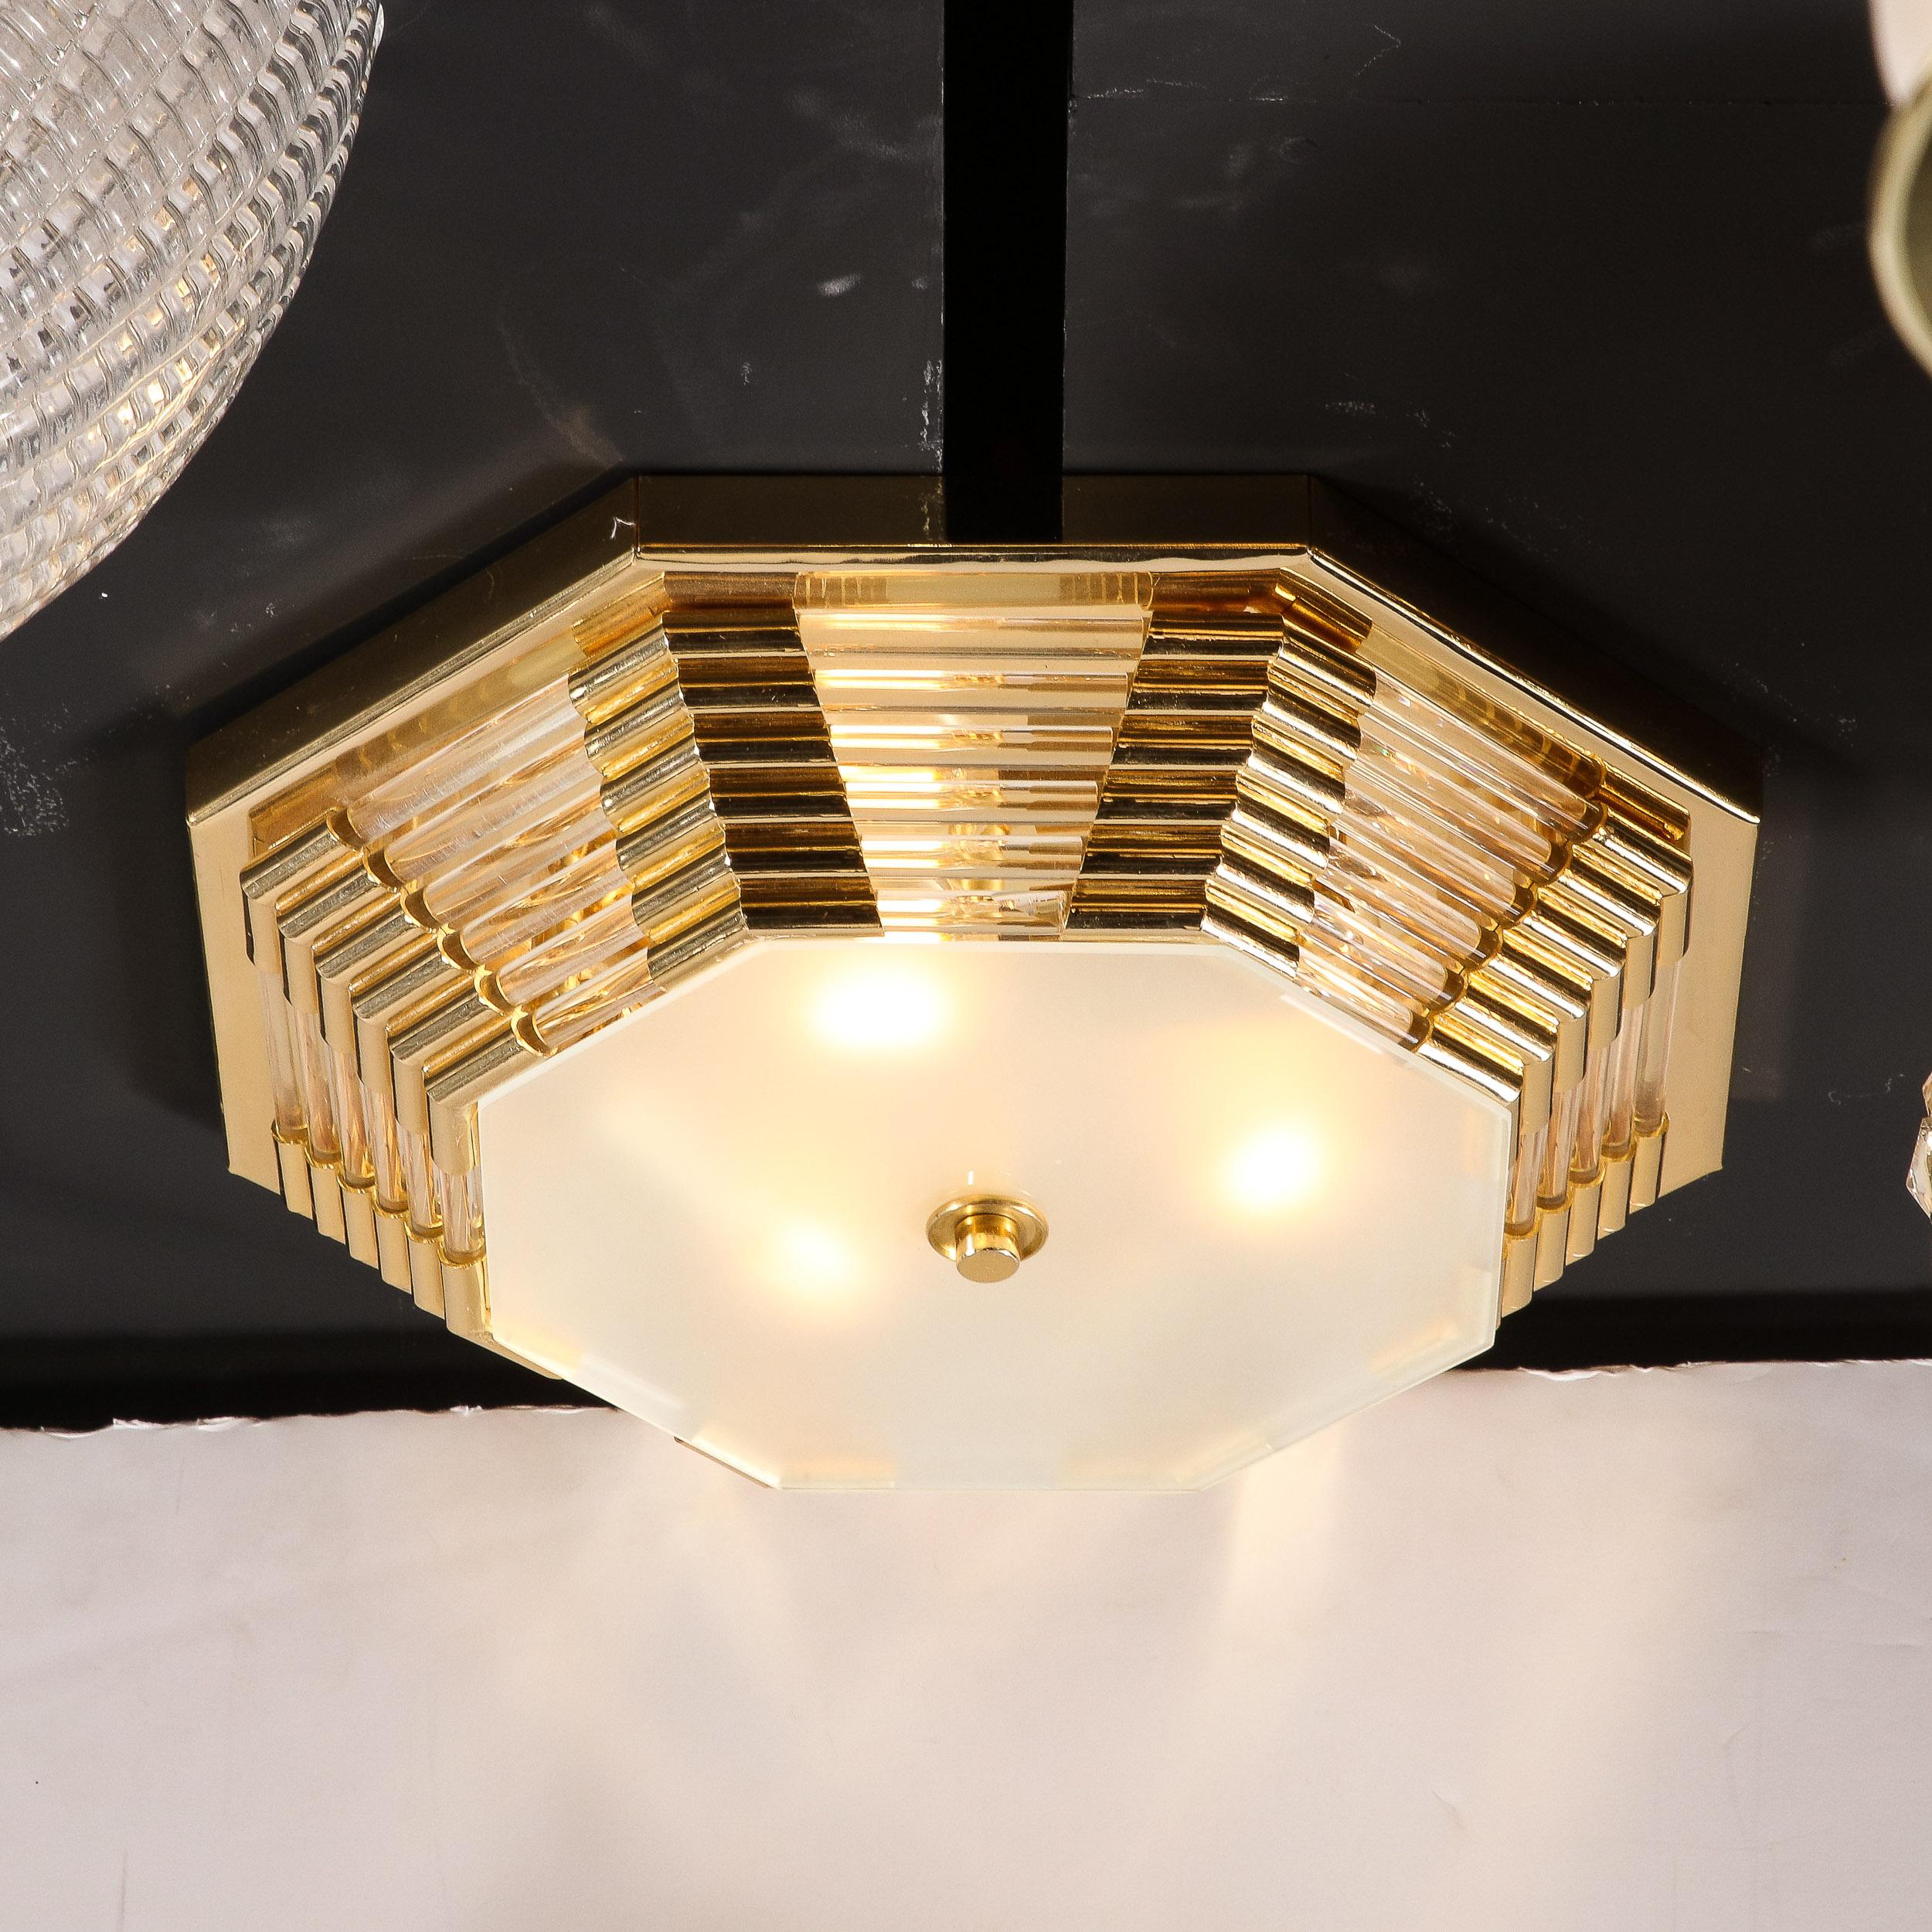 This Modernist Octagonal Brass w/ Glass Rods & Frosted Shade Flush Mount Chandelier originates from the Italy, Circa 1980. Featuring a tiered a geometric design, composed in brass with glass rod detailing and a frosted glass, octagonal bottom shade